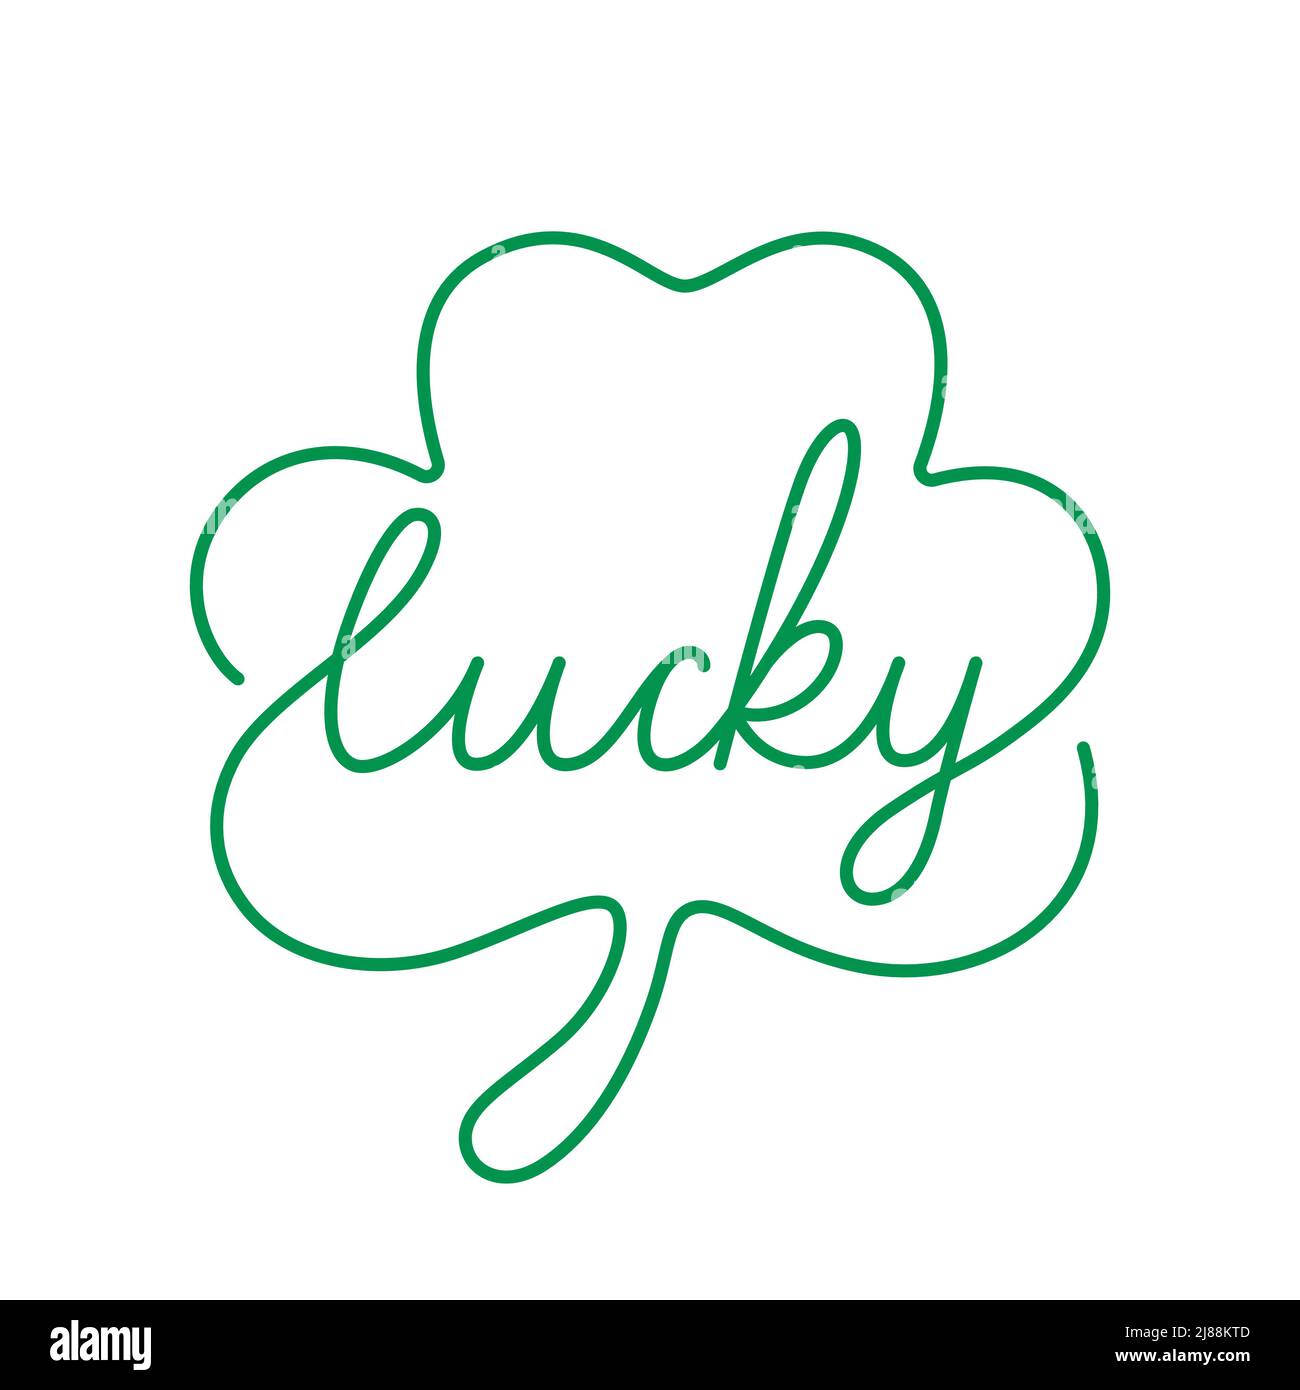 Lucky text in shamrock continuous line trendy style. Clover quote design for Irish holiday st. Patricks day vector illustration Stock Vector